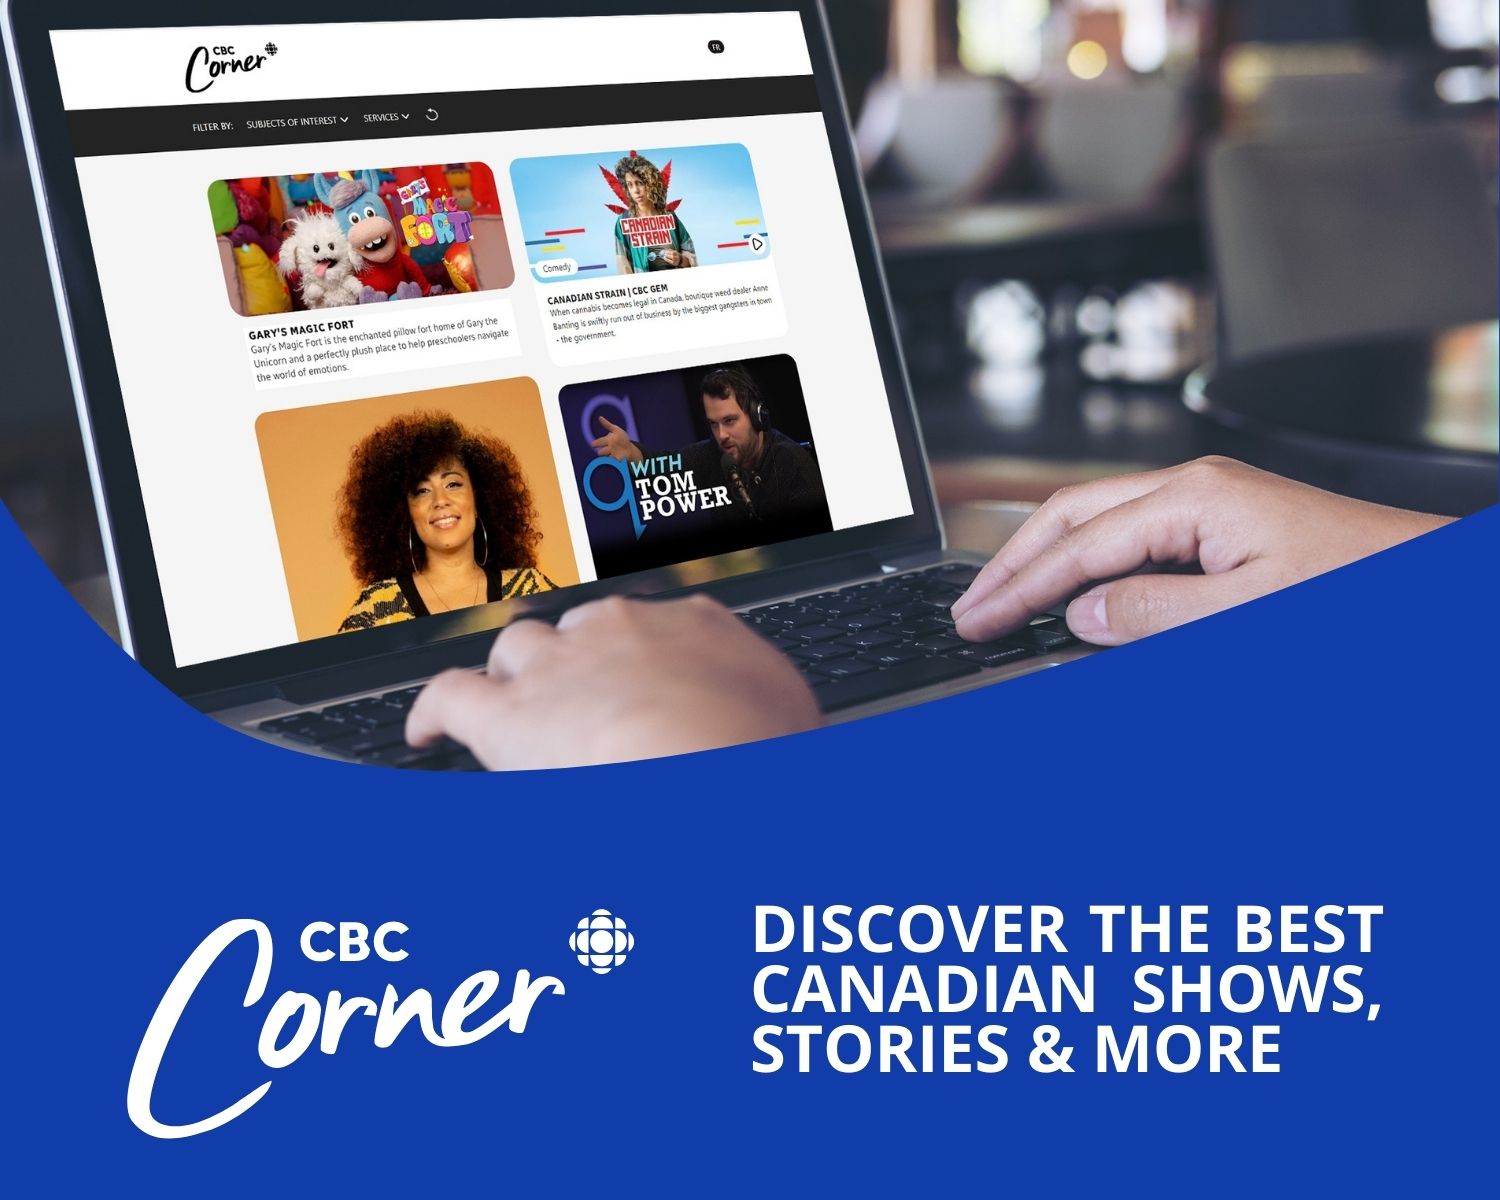 CBC Corner: "Discover the best Canadian shows, stories and more" - someone on CBC Corner